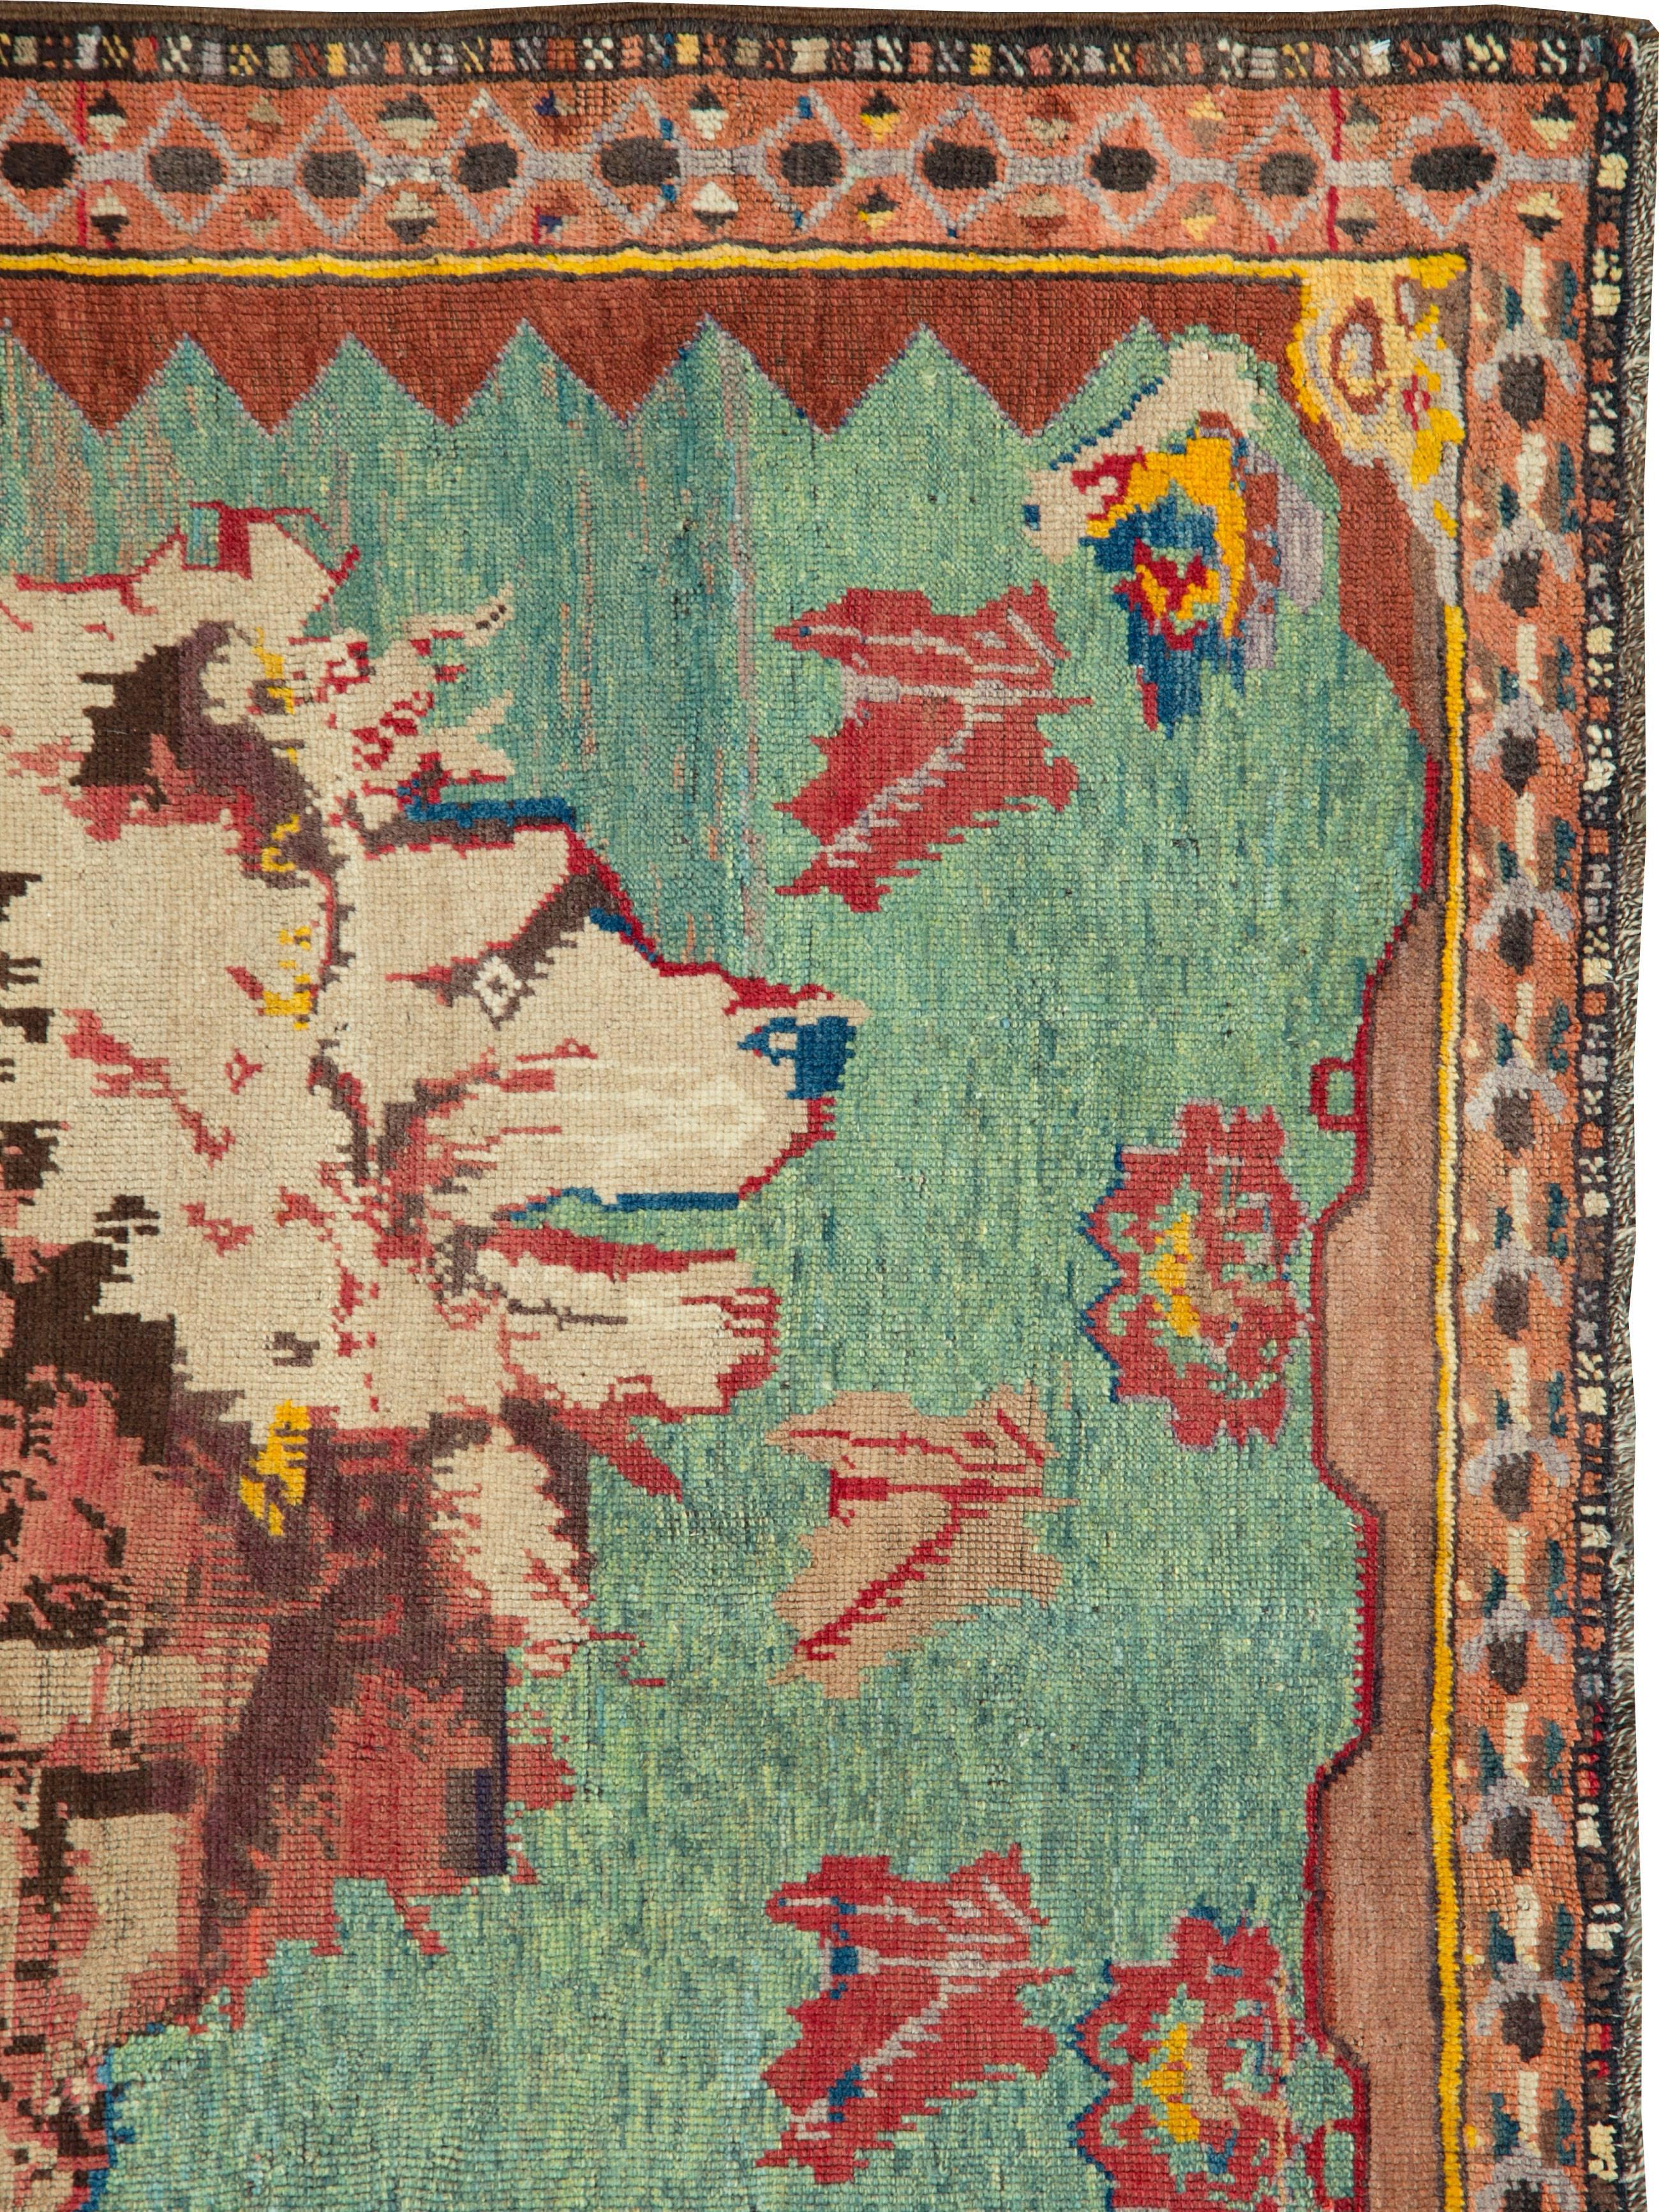 An antique Persian Gabbeh rug from the early 20th century.